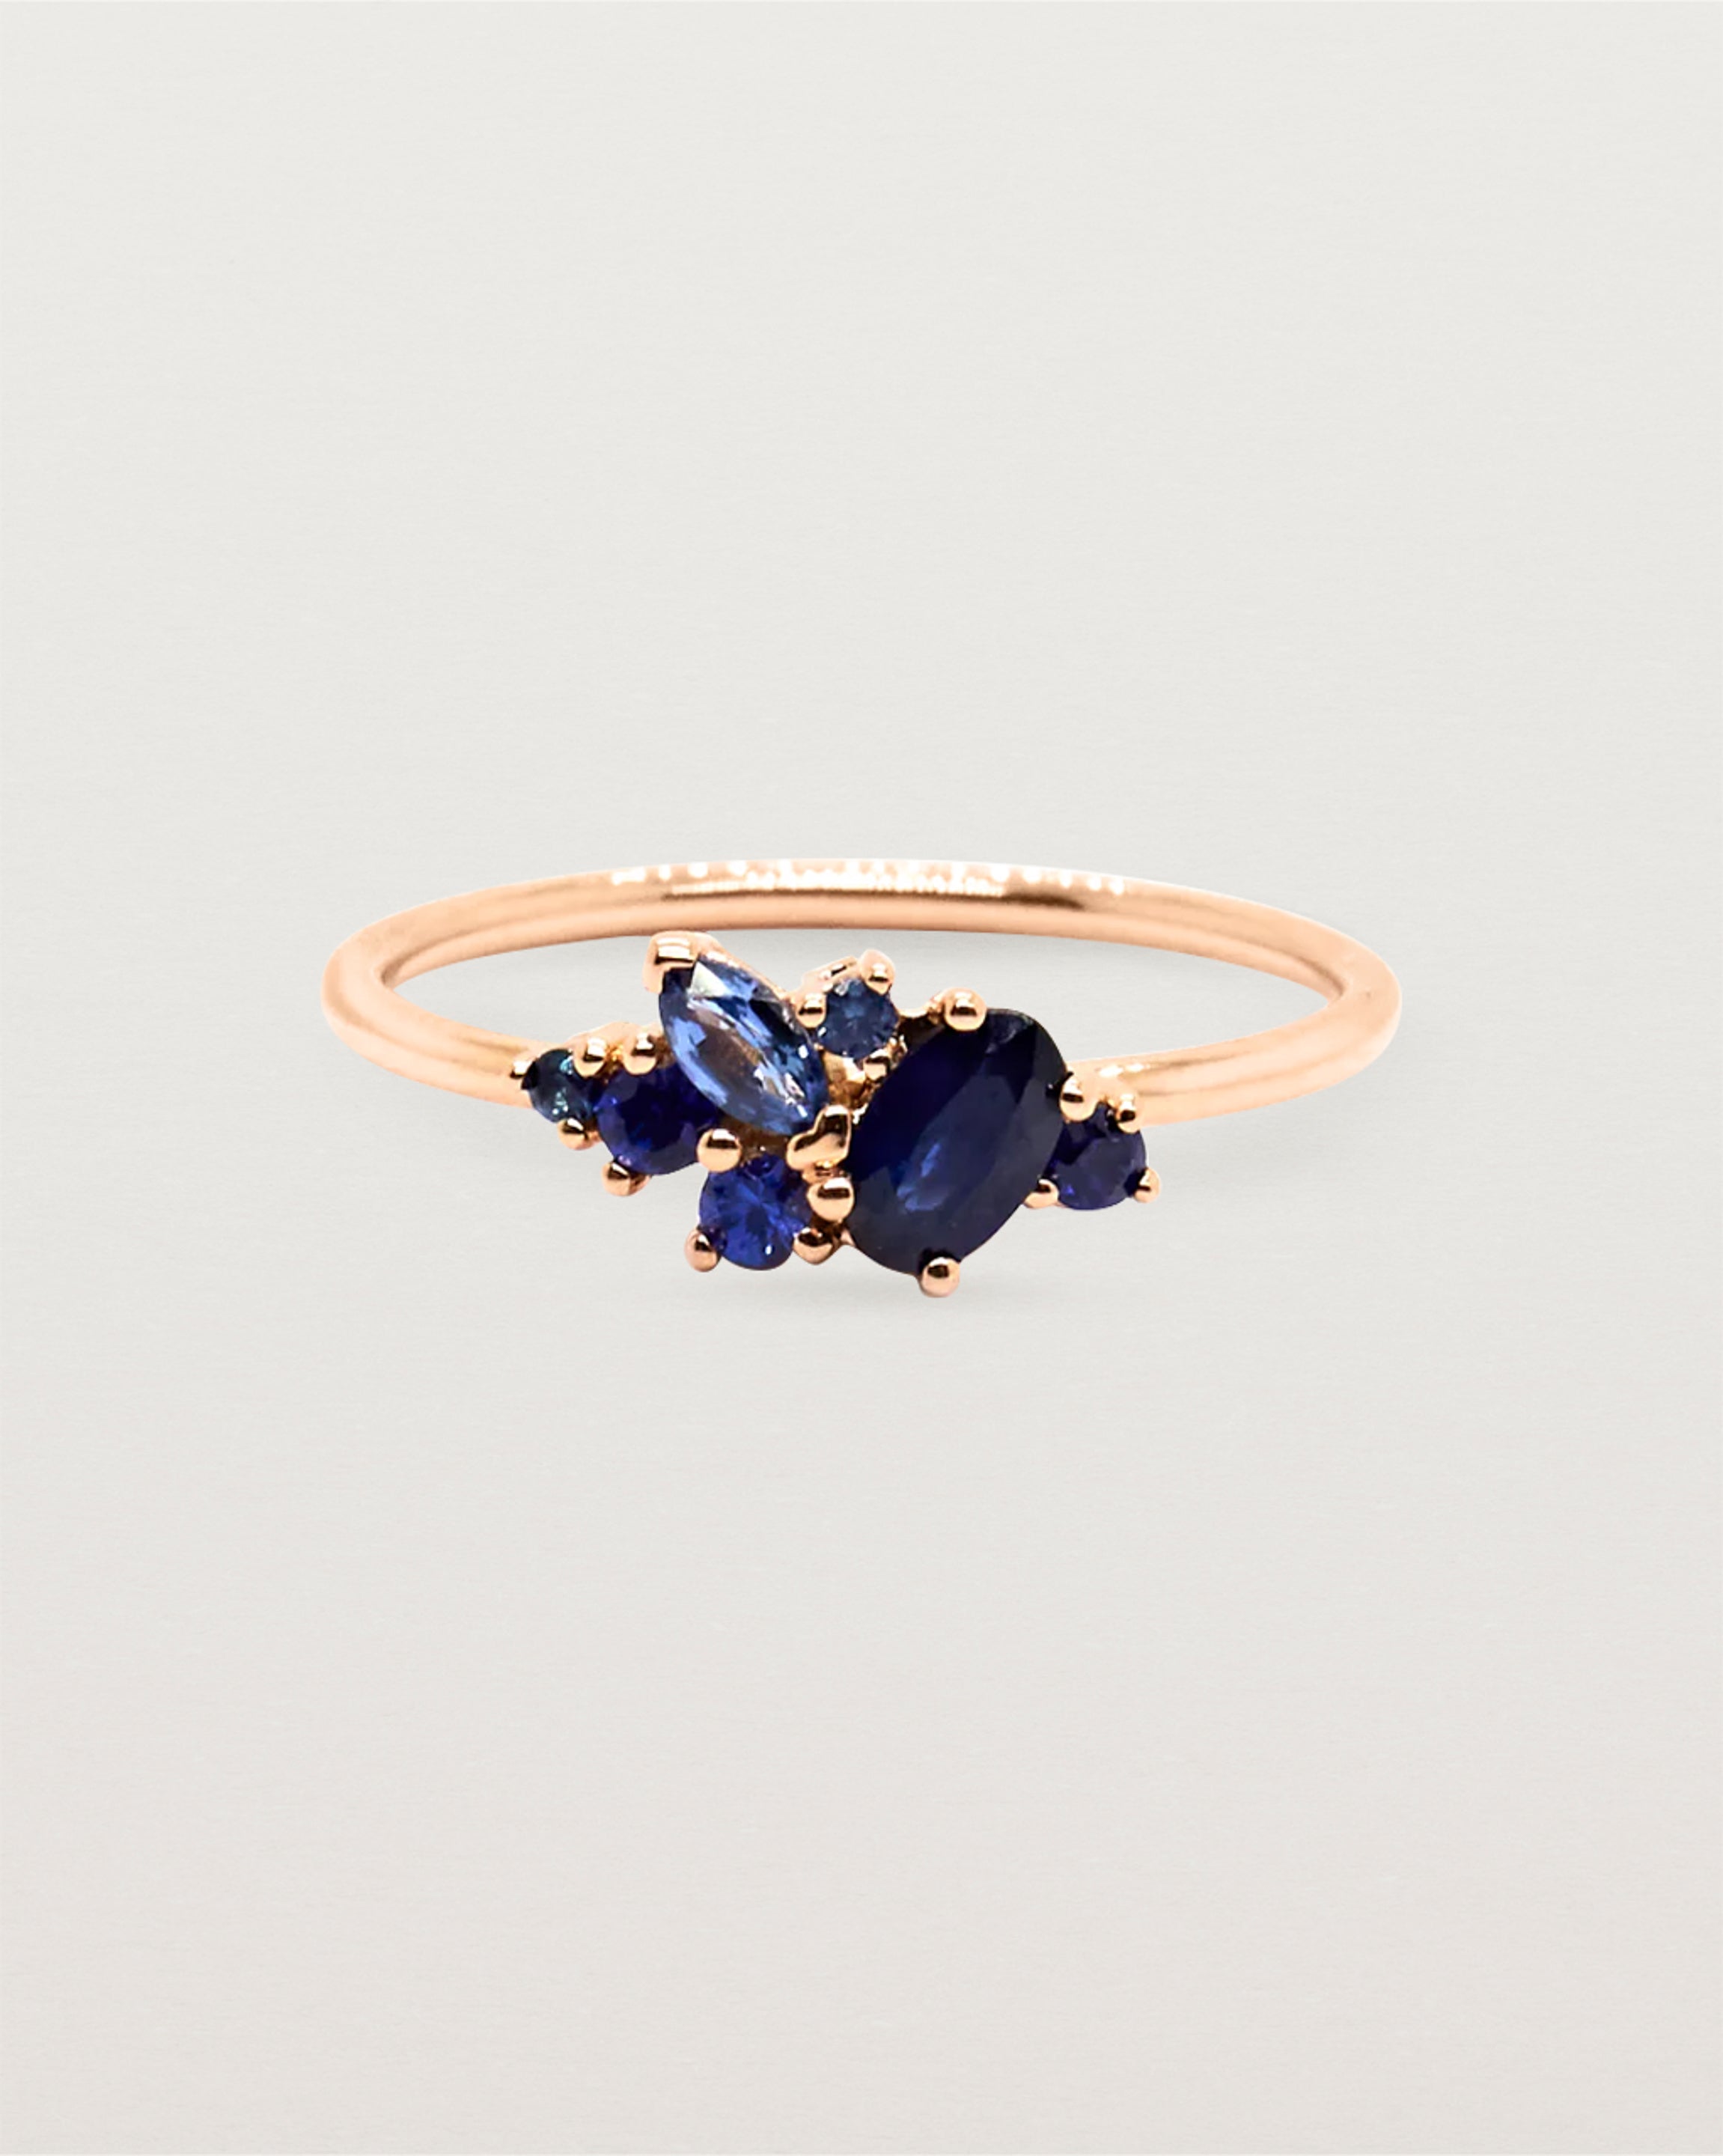 Deep blue sapphire cluster ring, featuring marquise, oval and round stones, crafted in rose gold